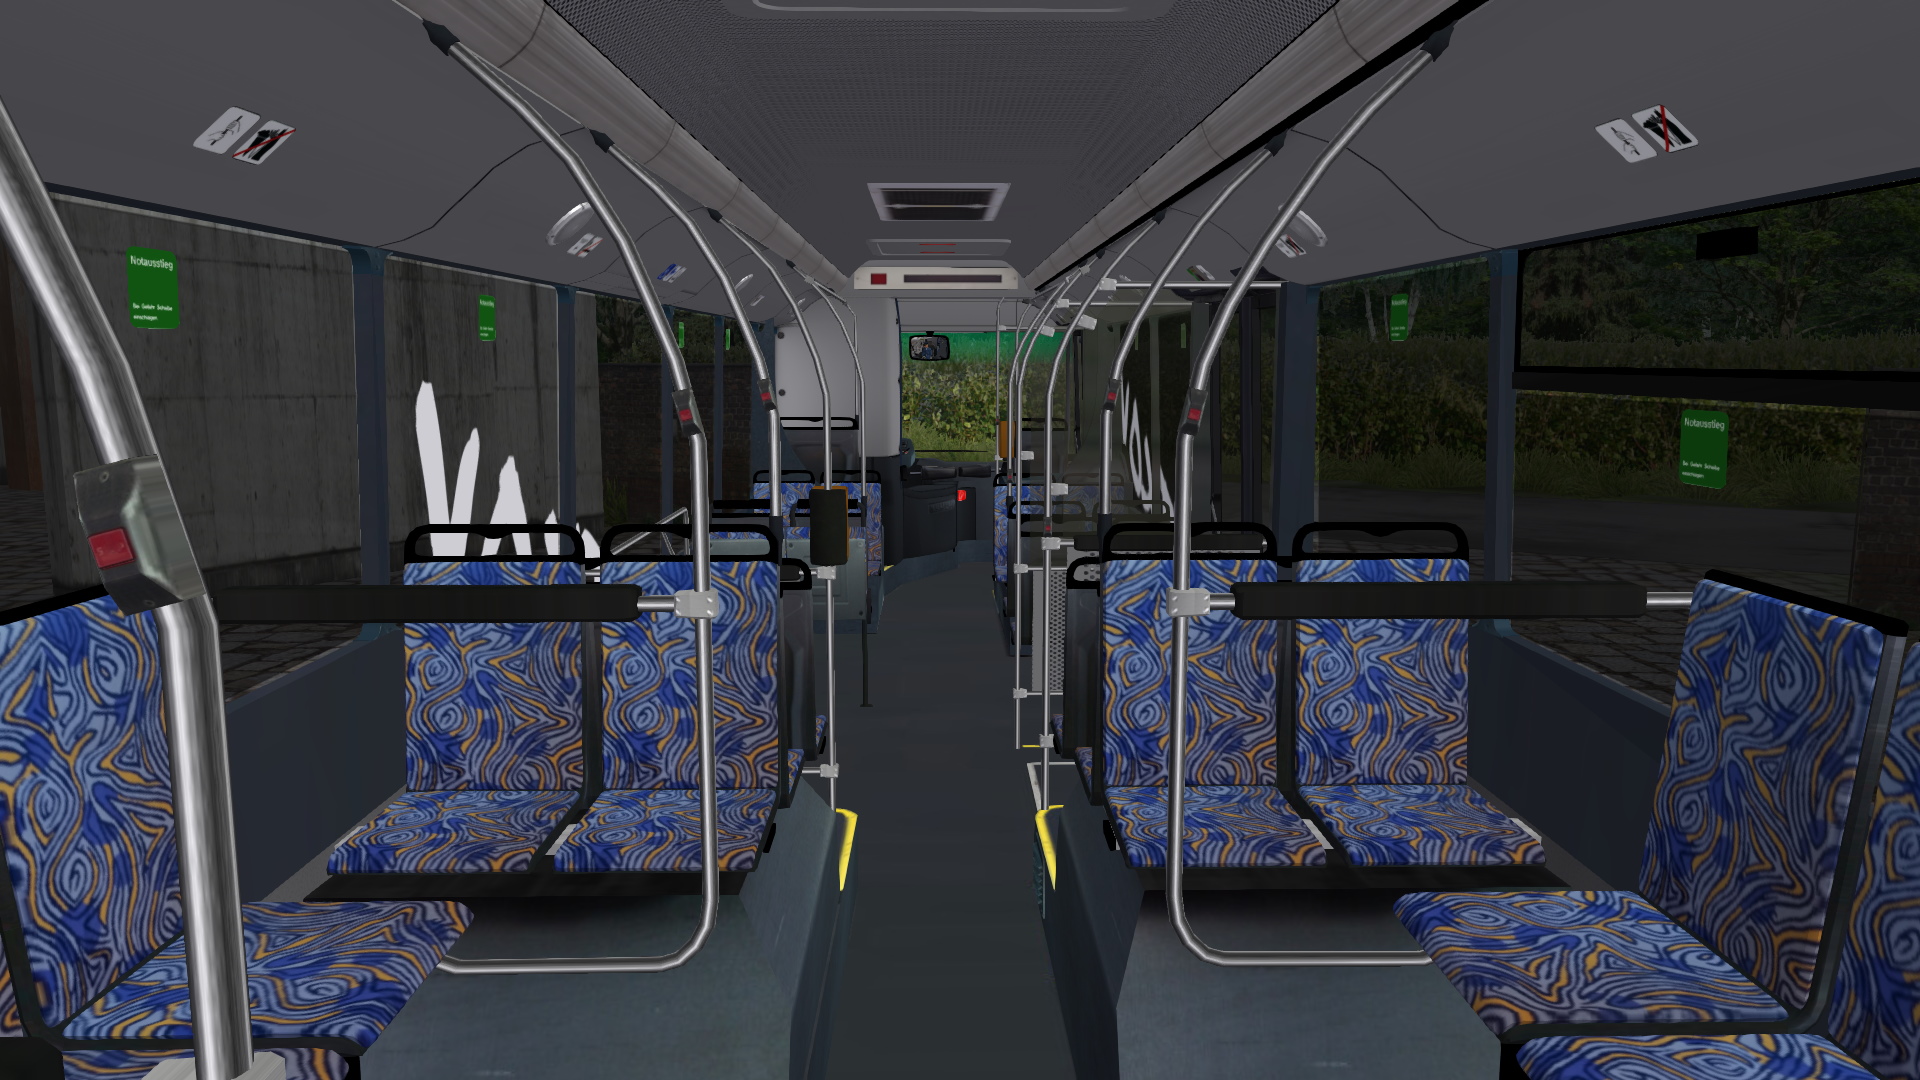 [Omsi2] Neoplan Centroliner Euro 3 BETA V 0.7 - PATCH/UPDATE! (by Kevin2704) 10559-6-jpg